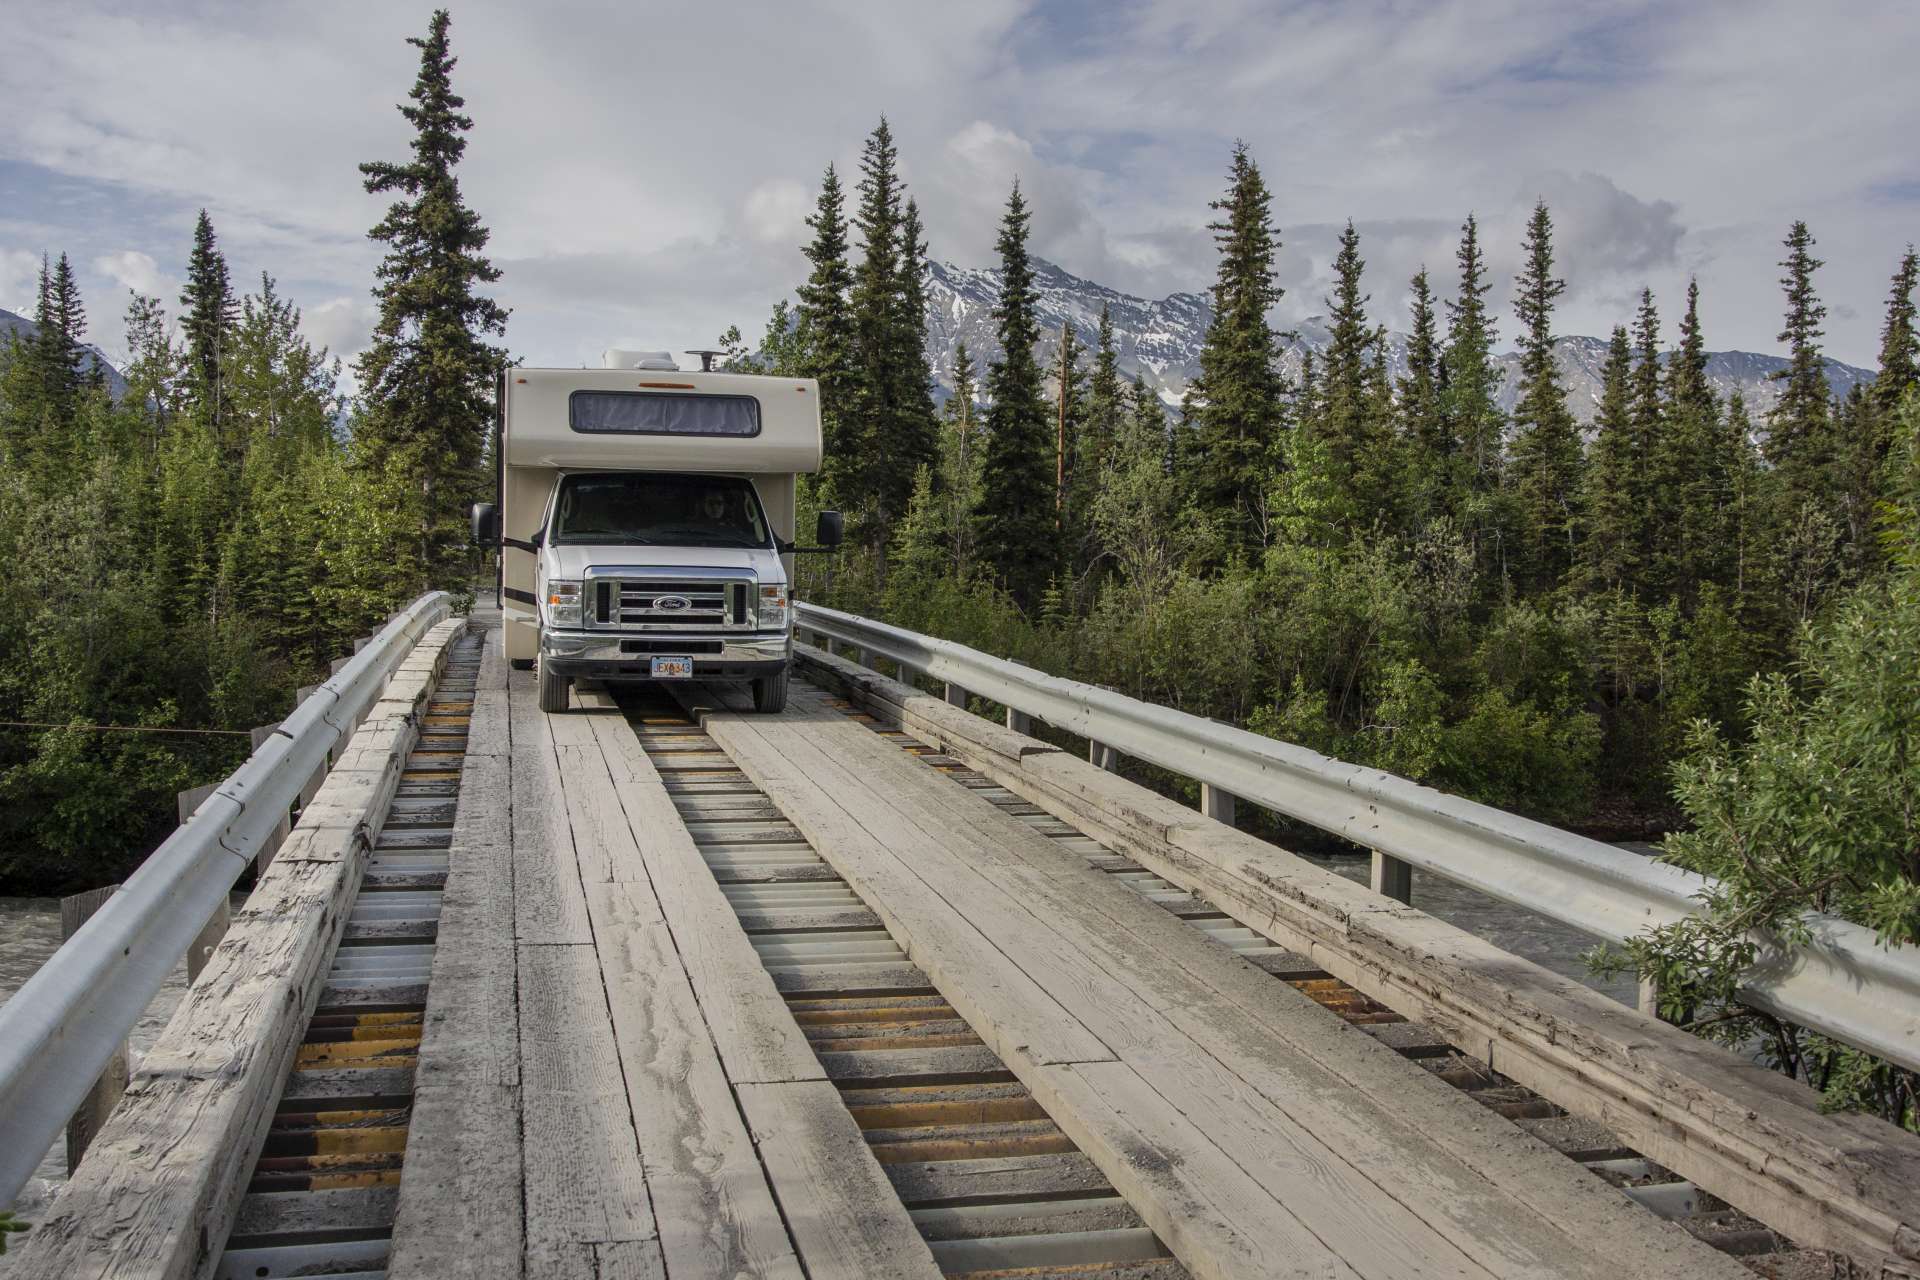 A motorhome driving on a wooden bridge with trees and a mountain in the background during daylight